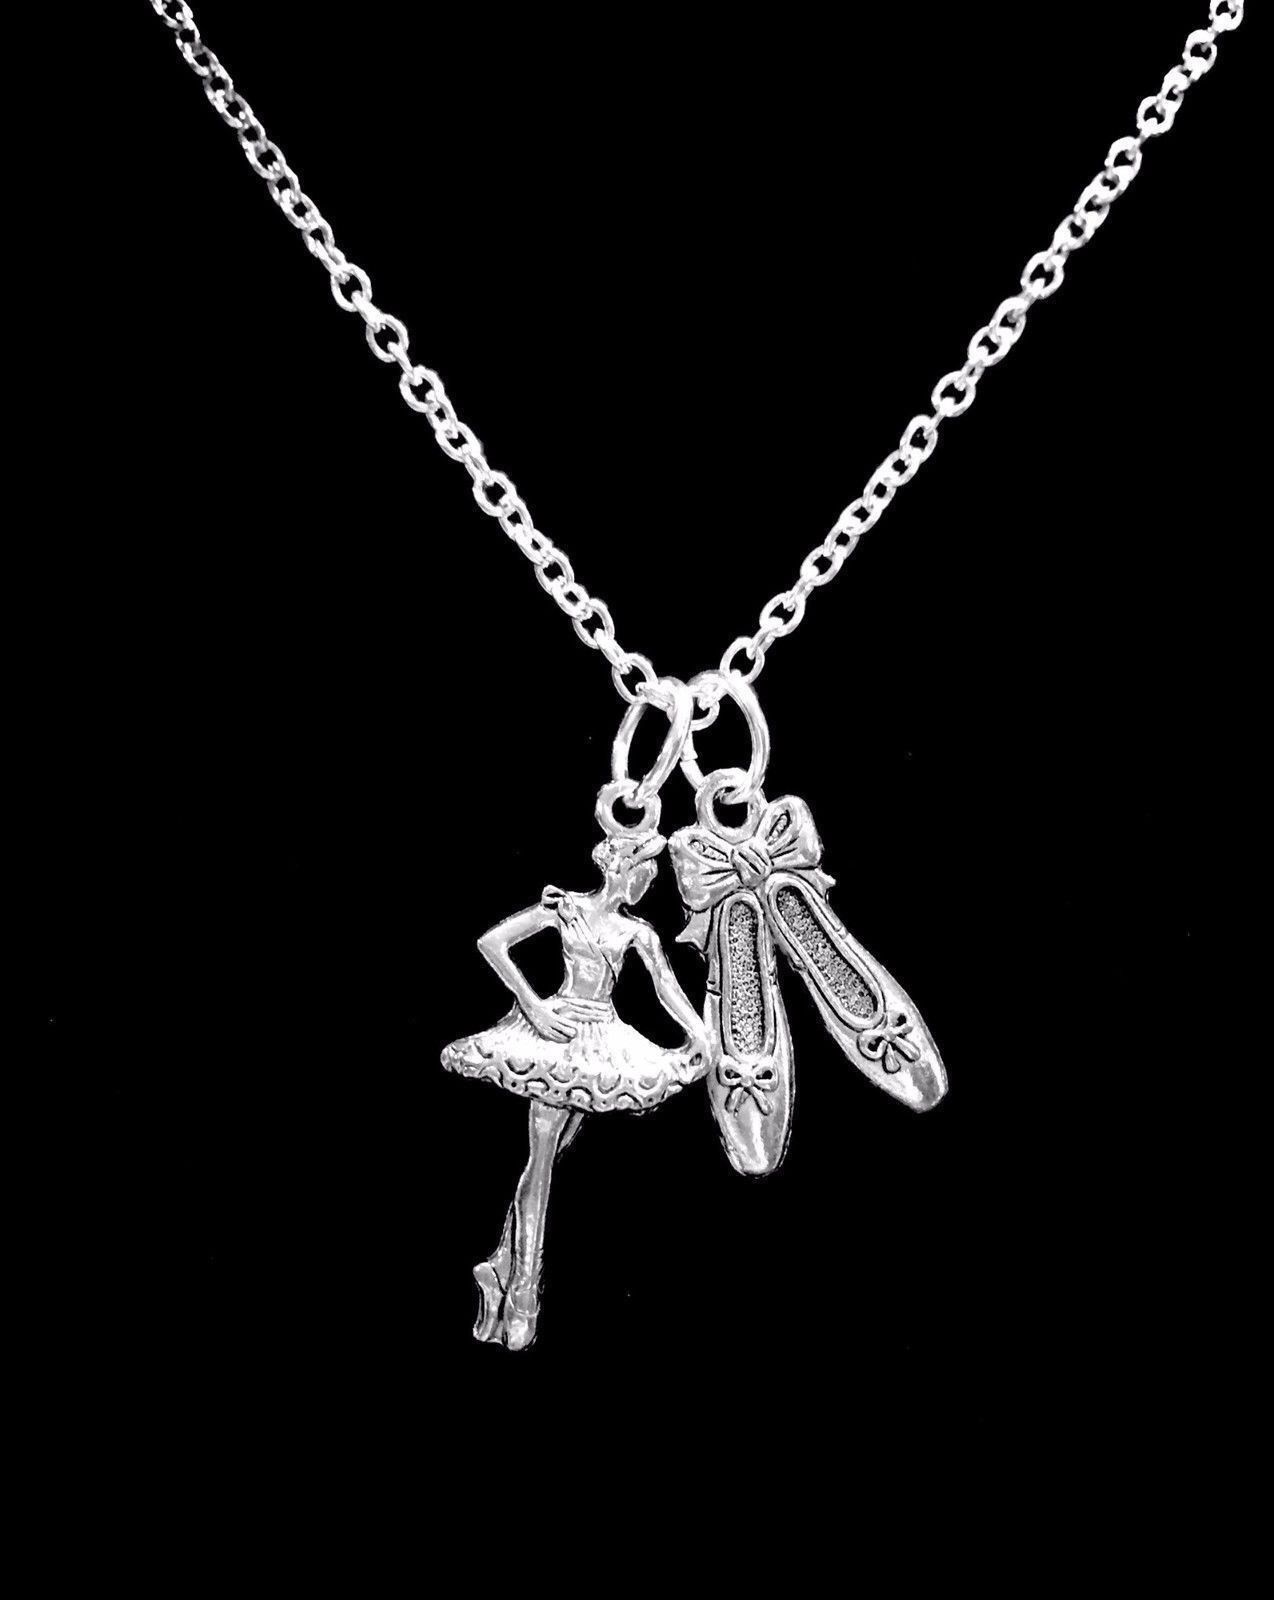 Ballerina Necklace Ballet Slippers Shoes Dance Christmas Gift Charm Jewelry